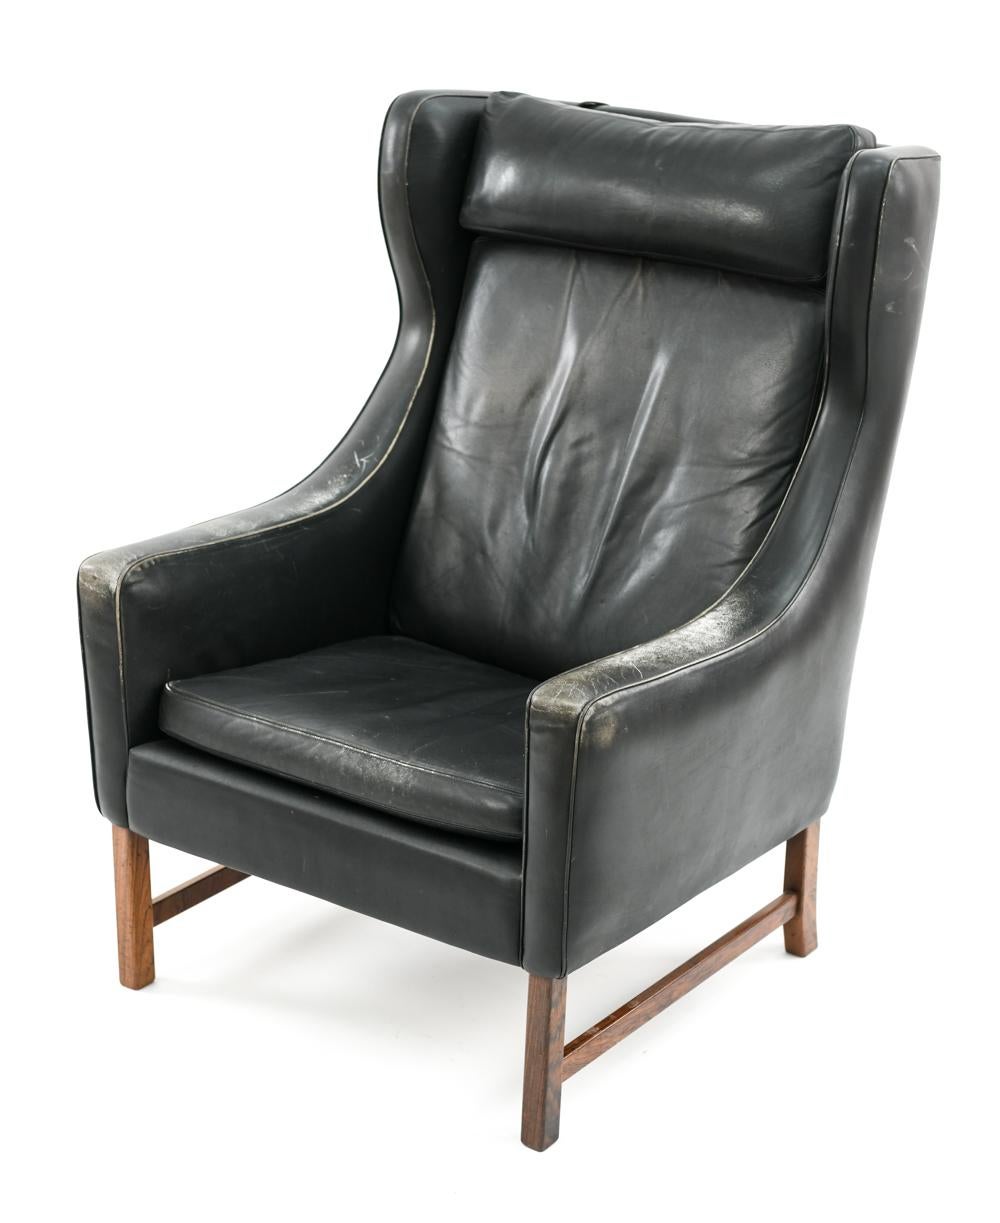 This midcentury wingback lounge chair was designed in 1964-1965 by Fredrik Kayser for Vatne Mobler, Norway. This model 965 chair features a rosewood base and black leather upholstered seat, back, and headrest cushions for ultimate comfort and style.